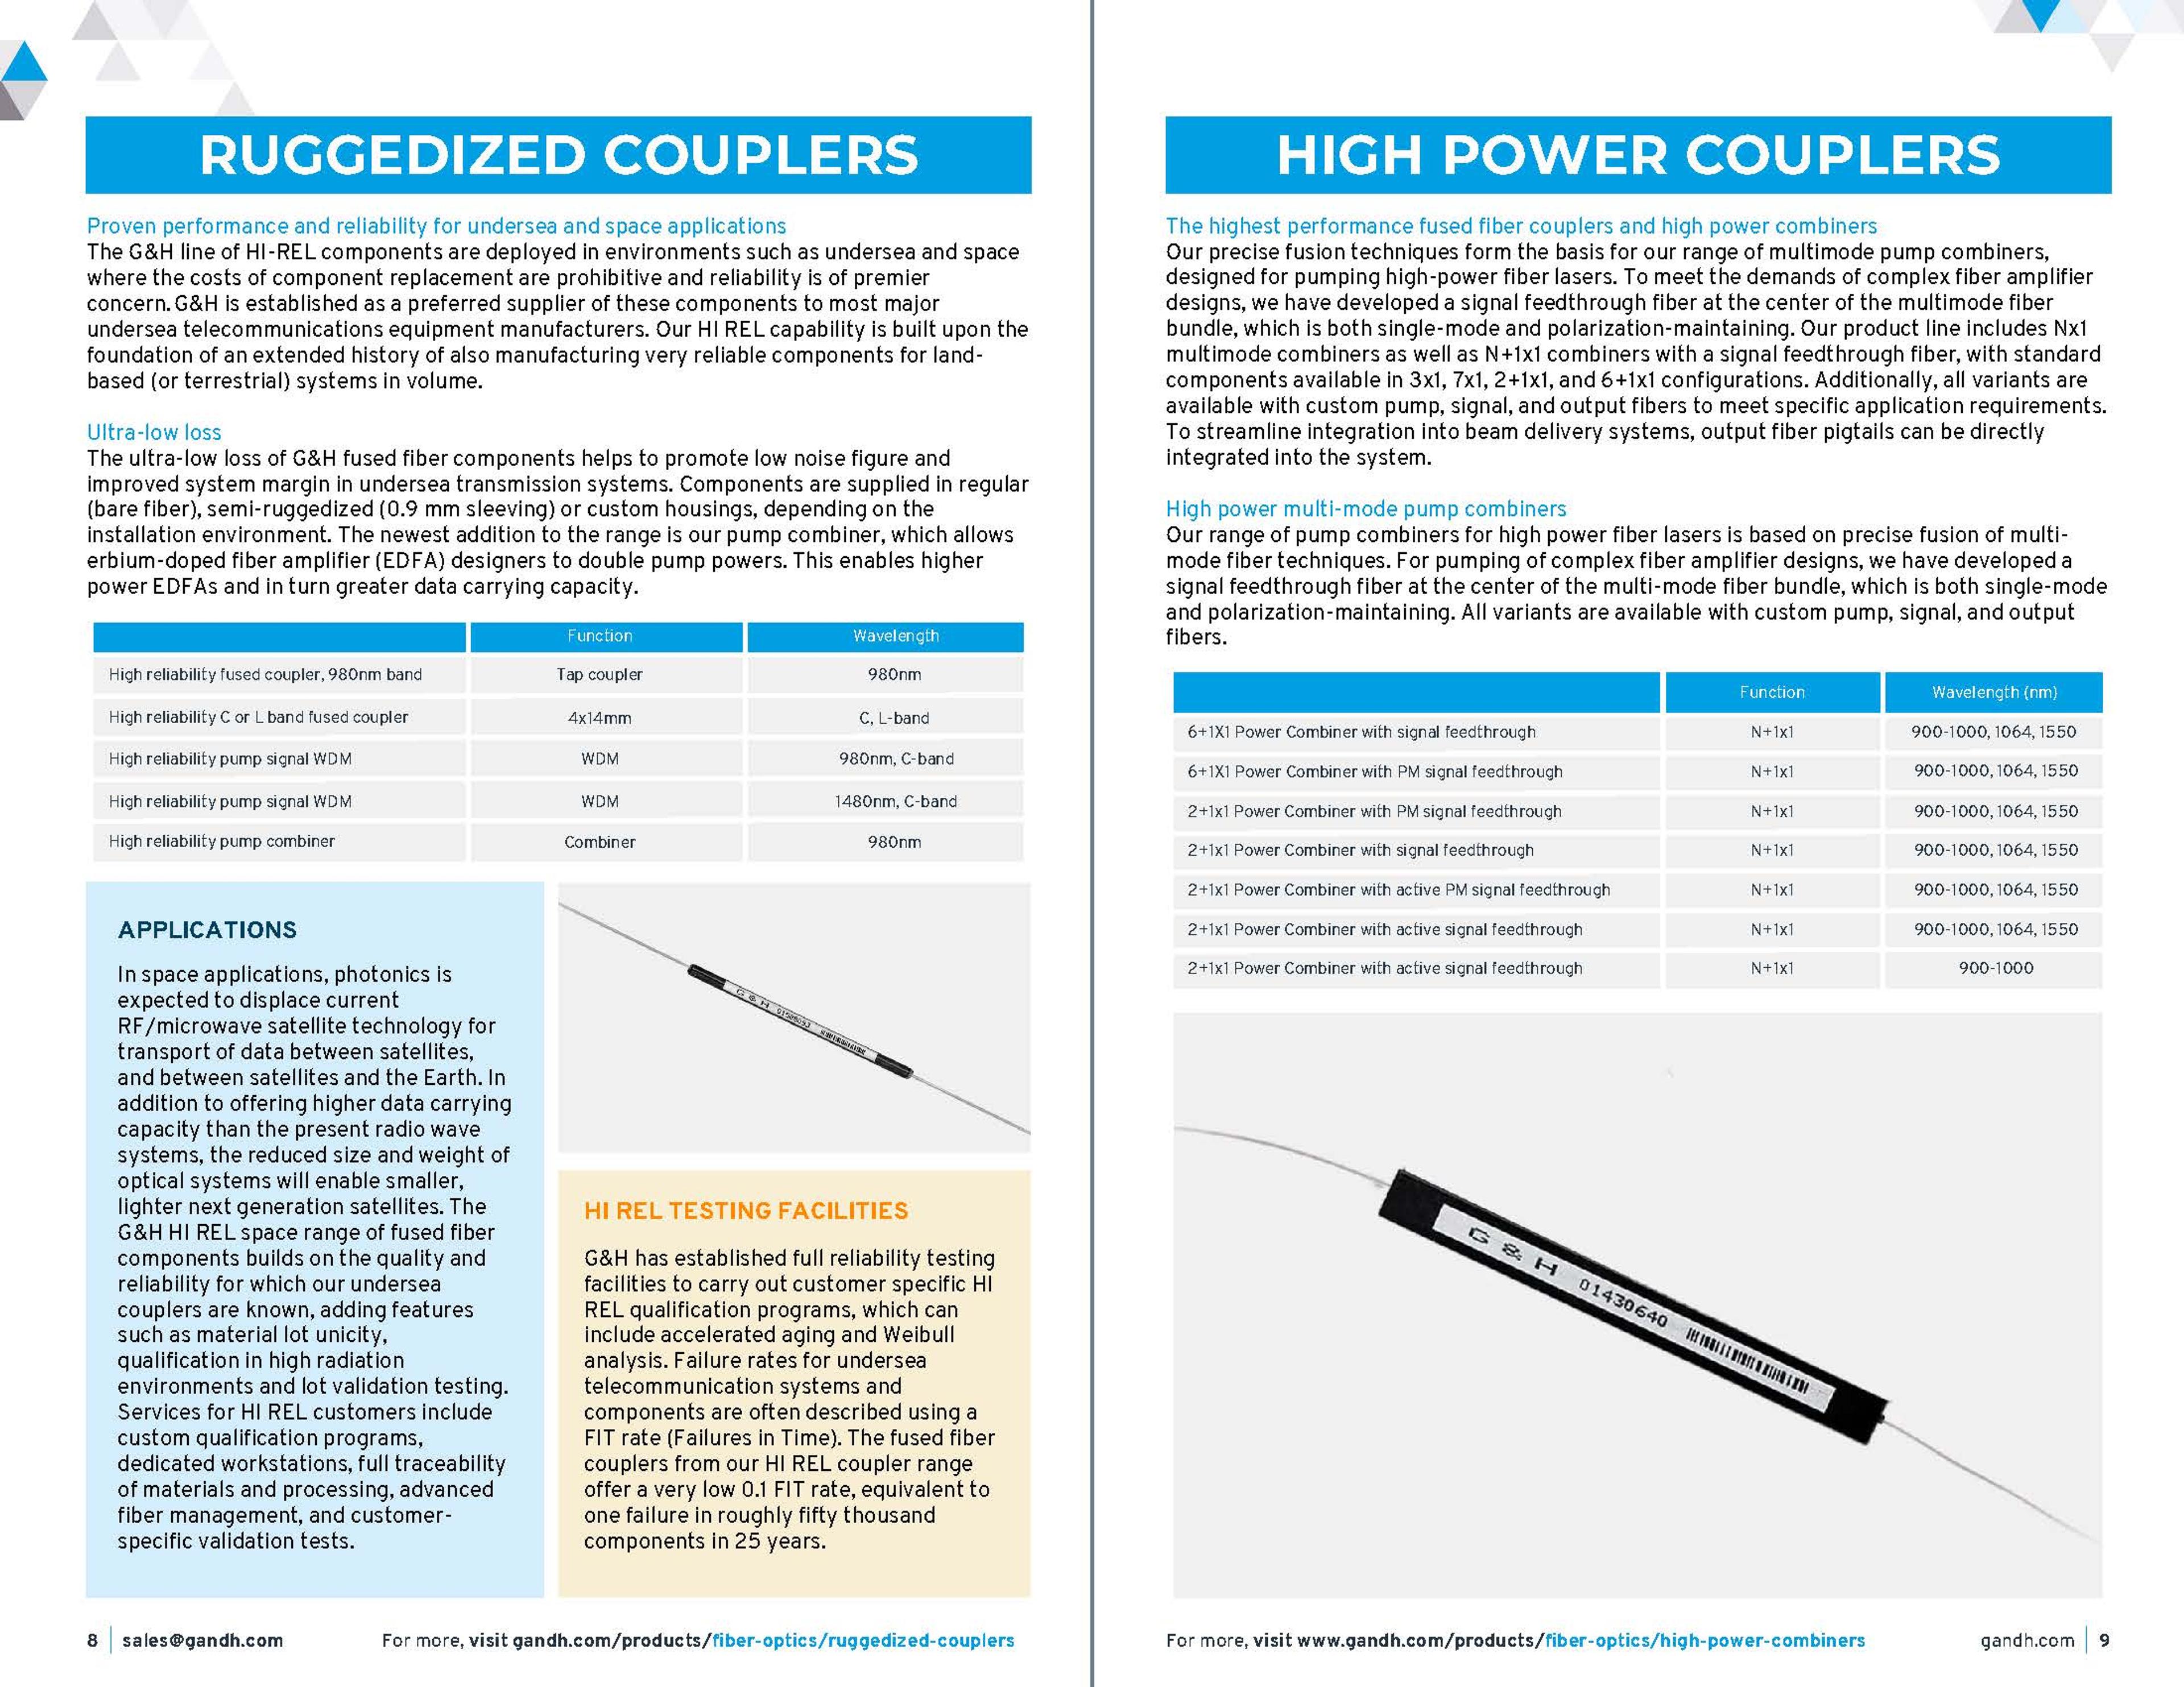 G&H Product & Solutions Guide - Fiber Optics Page 08-09